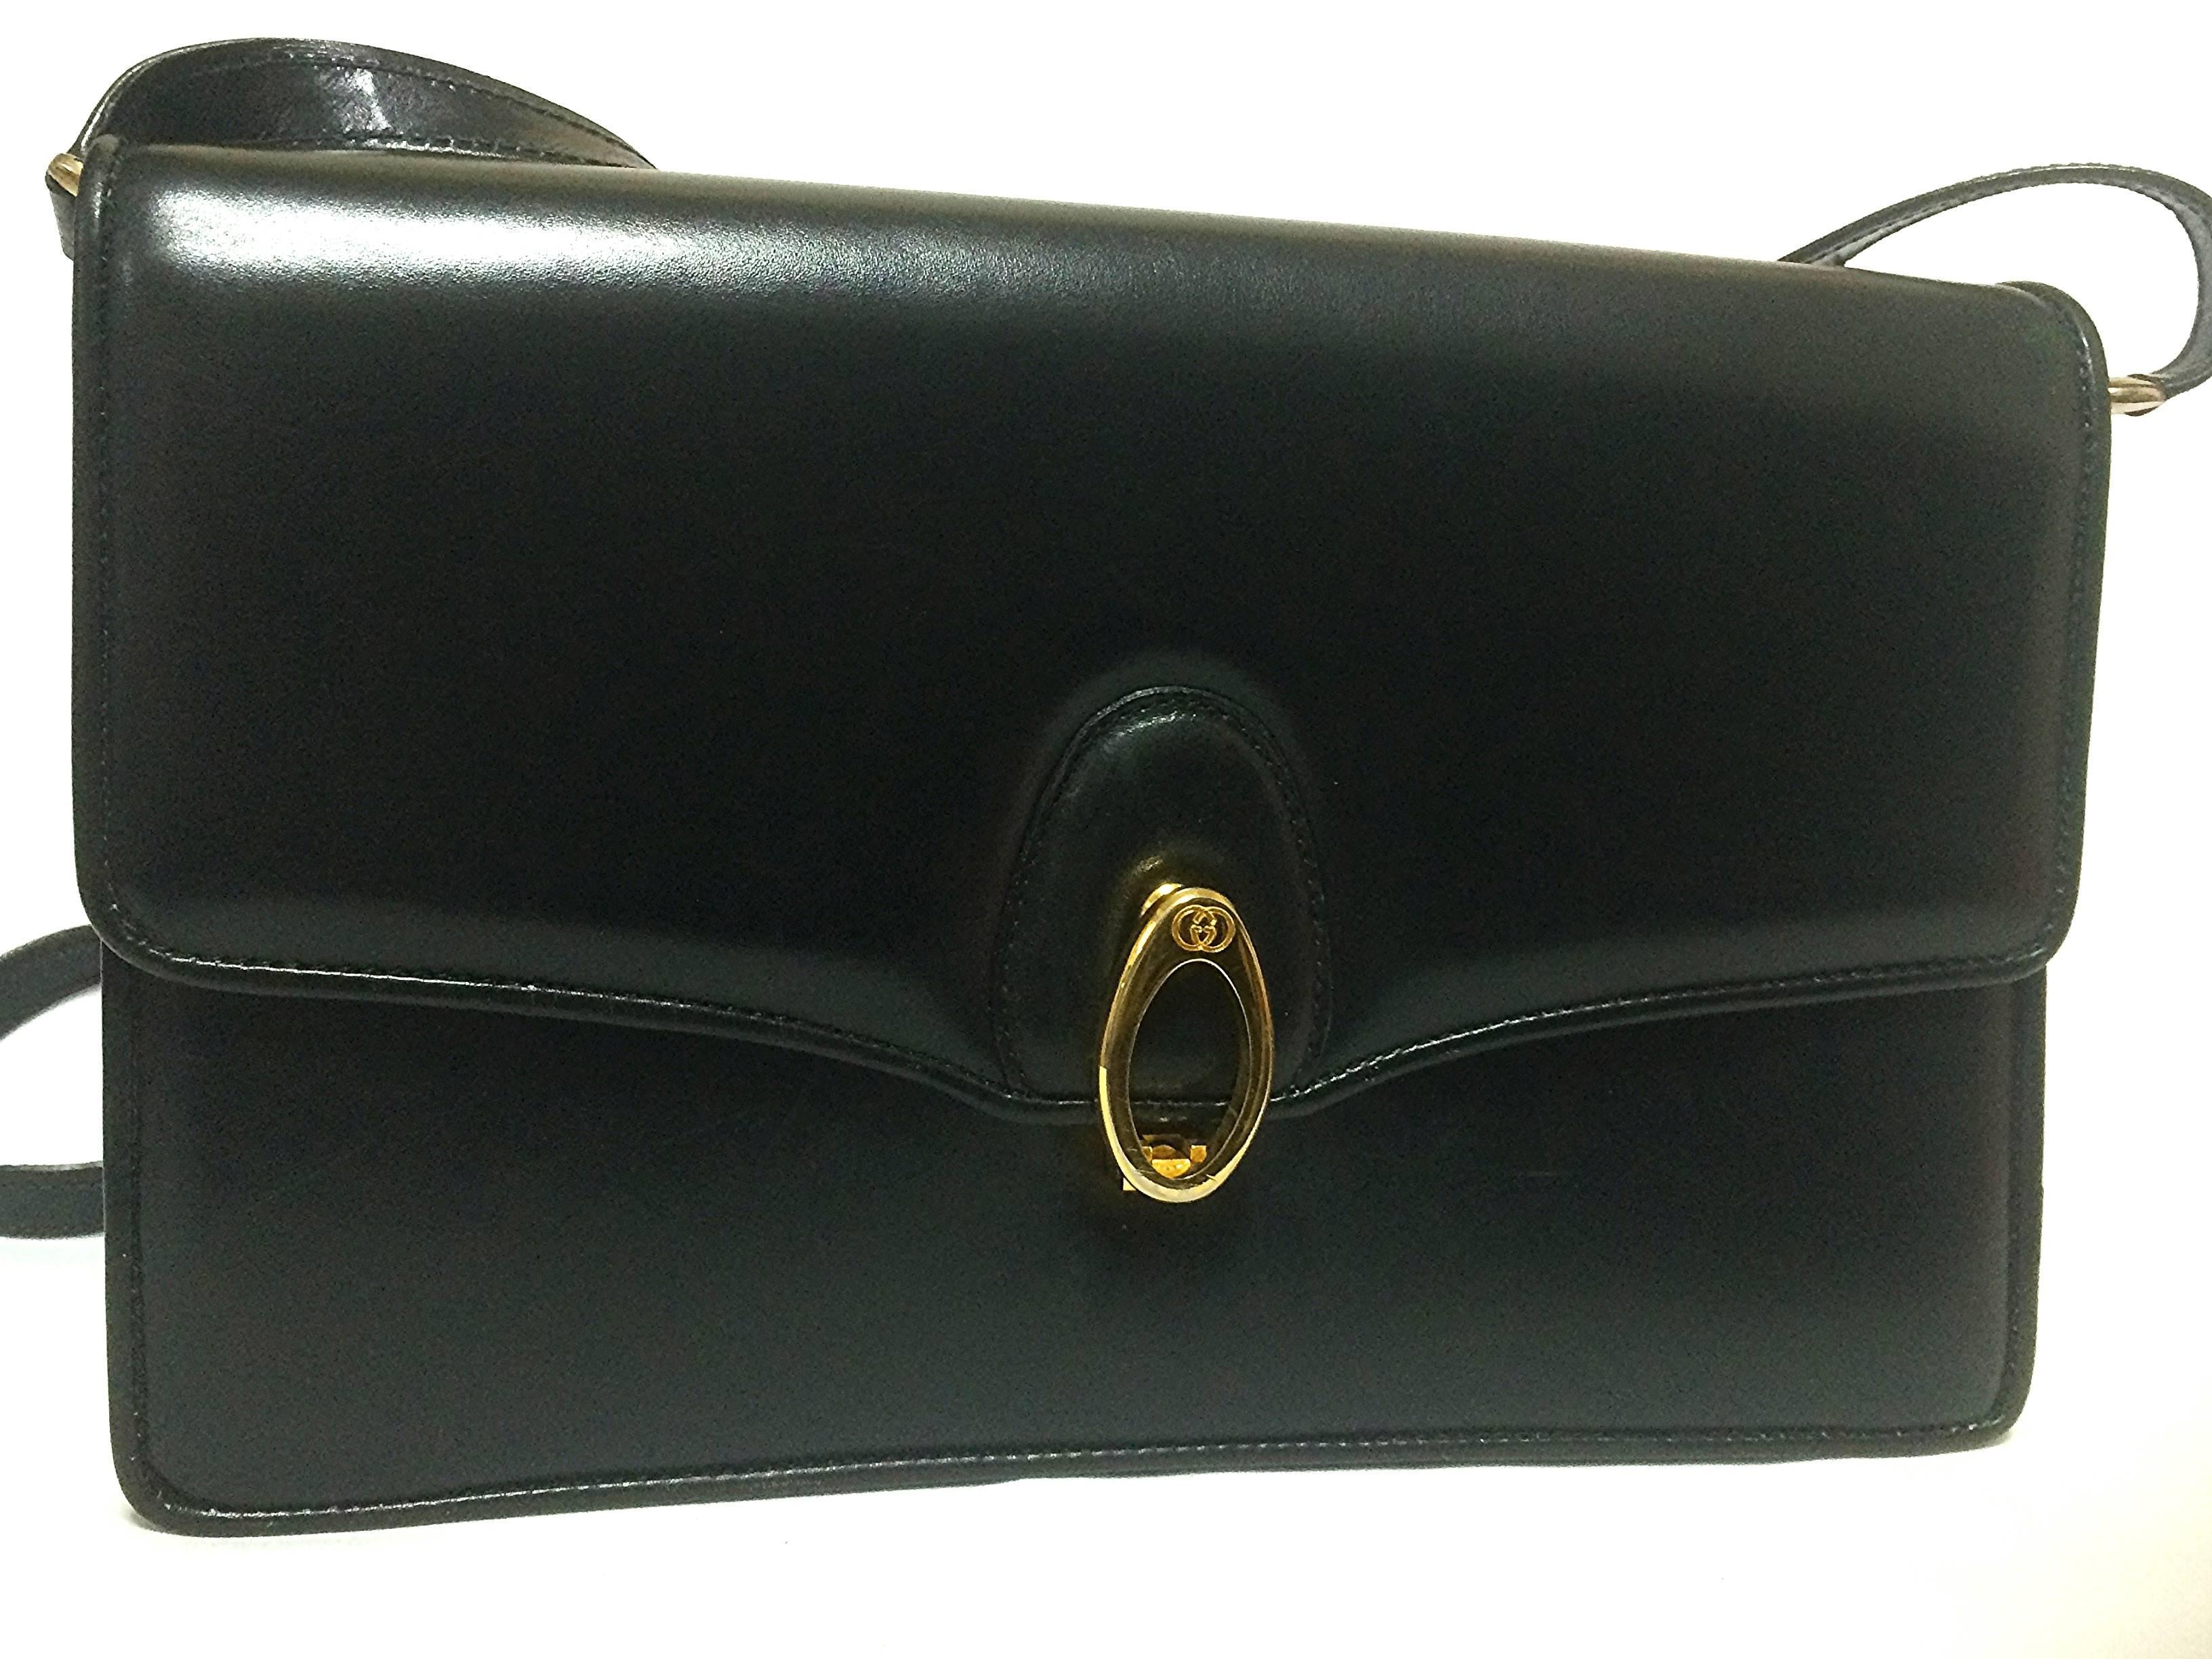 1980's vintage Gucci black leather shoulder bag with golden logo embossed oval motif closure. 

Introducing a masterpiece, leather shoulder from Gucci back in the 80's.
Very sophisticated purse that would never go out of style.
The front golden